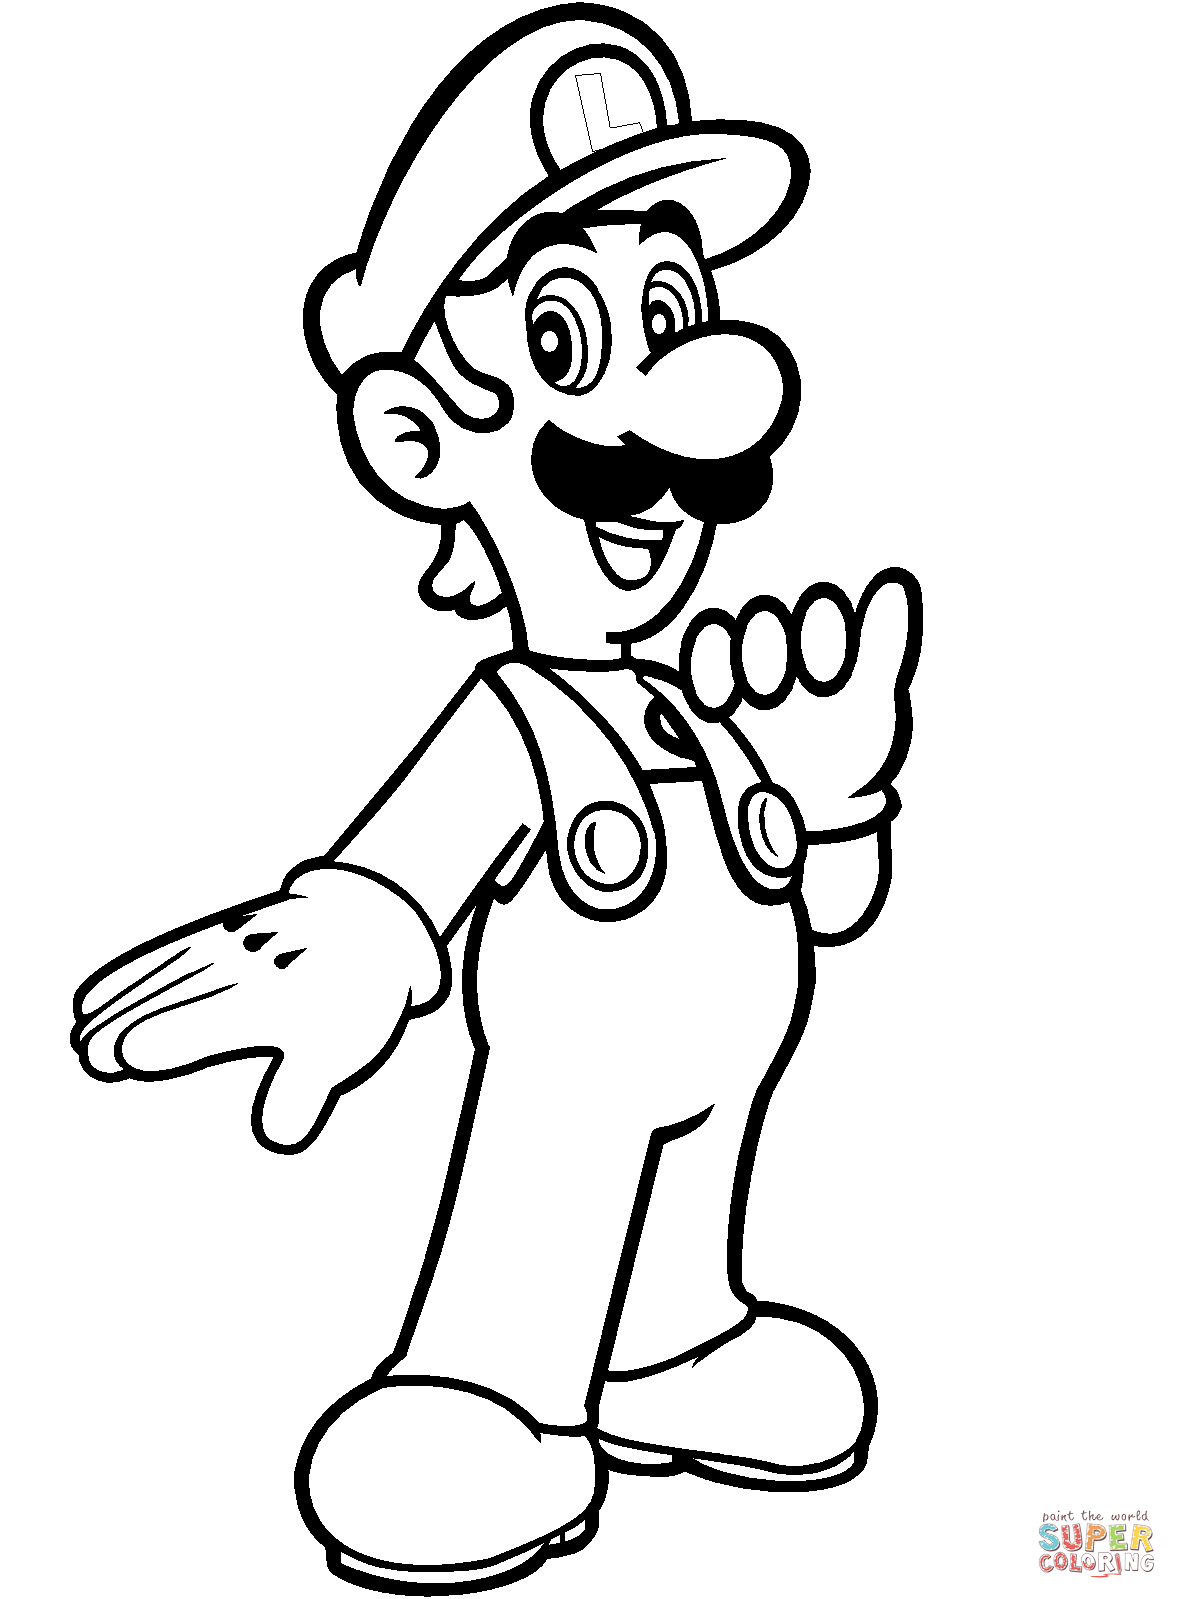 Mario Coloring Pages To Print Luigi From Mario Bros Coloring Page Free Printable Coloring Pages